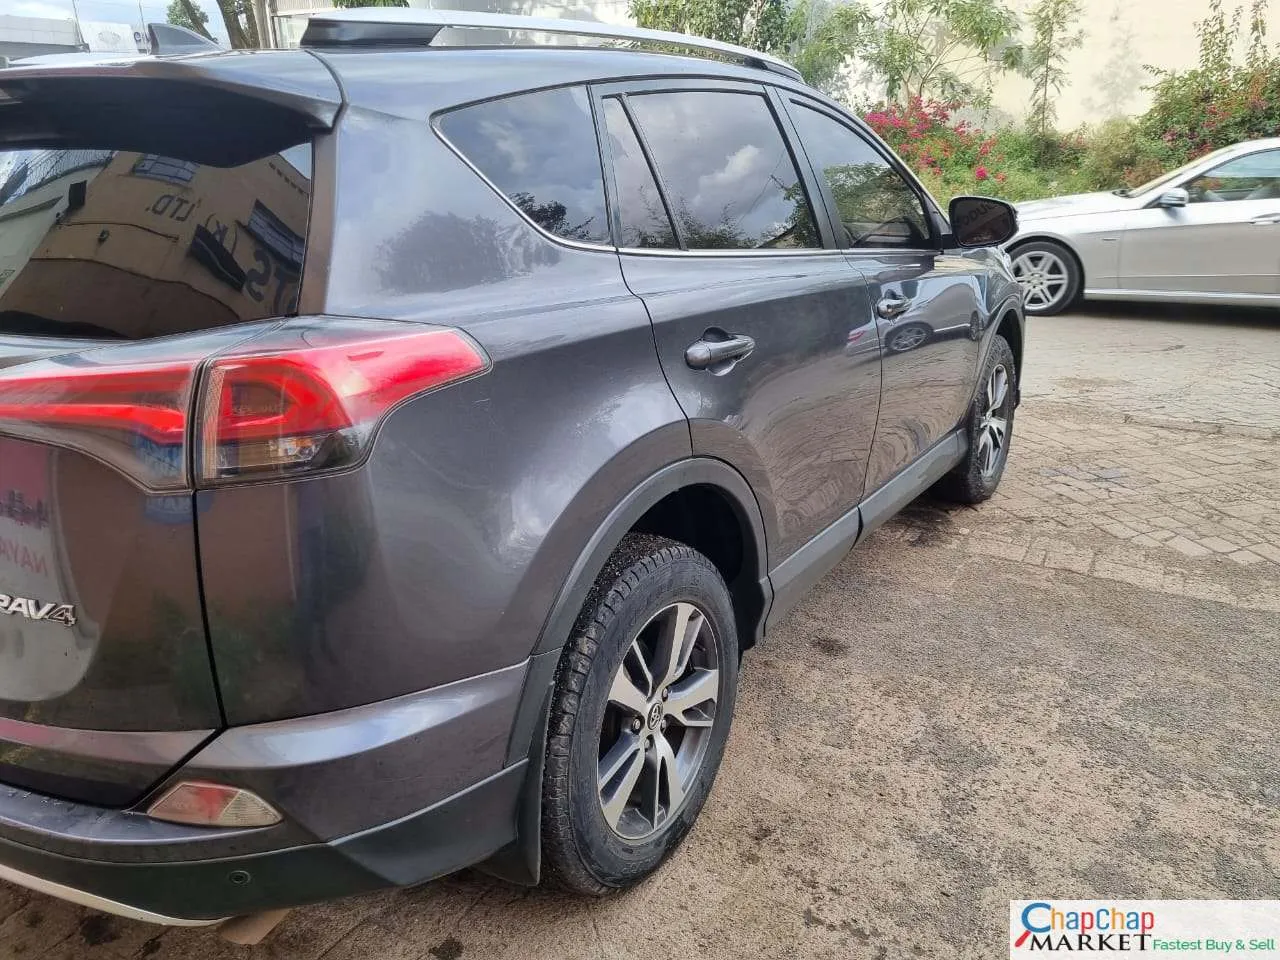 Toyota RAV4 locally assembled CHEAPEST New shape Rav4 For sale in kenya hire purchase installments You Pay 30% Deposit Trade in OK EXCLUSIVE